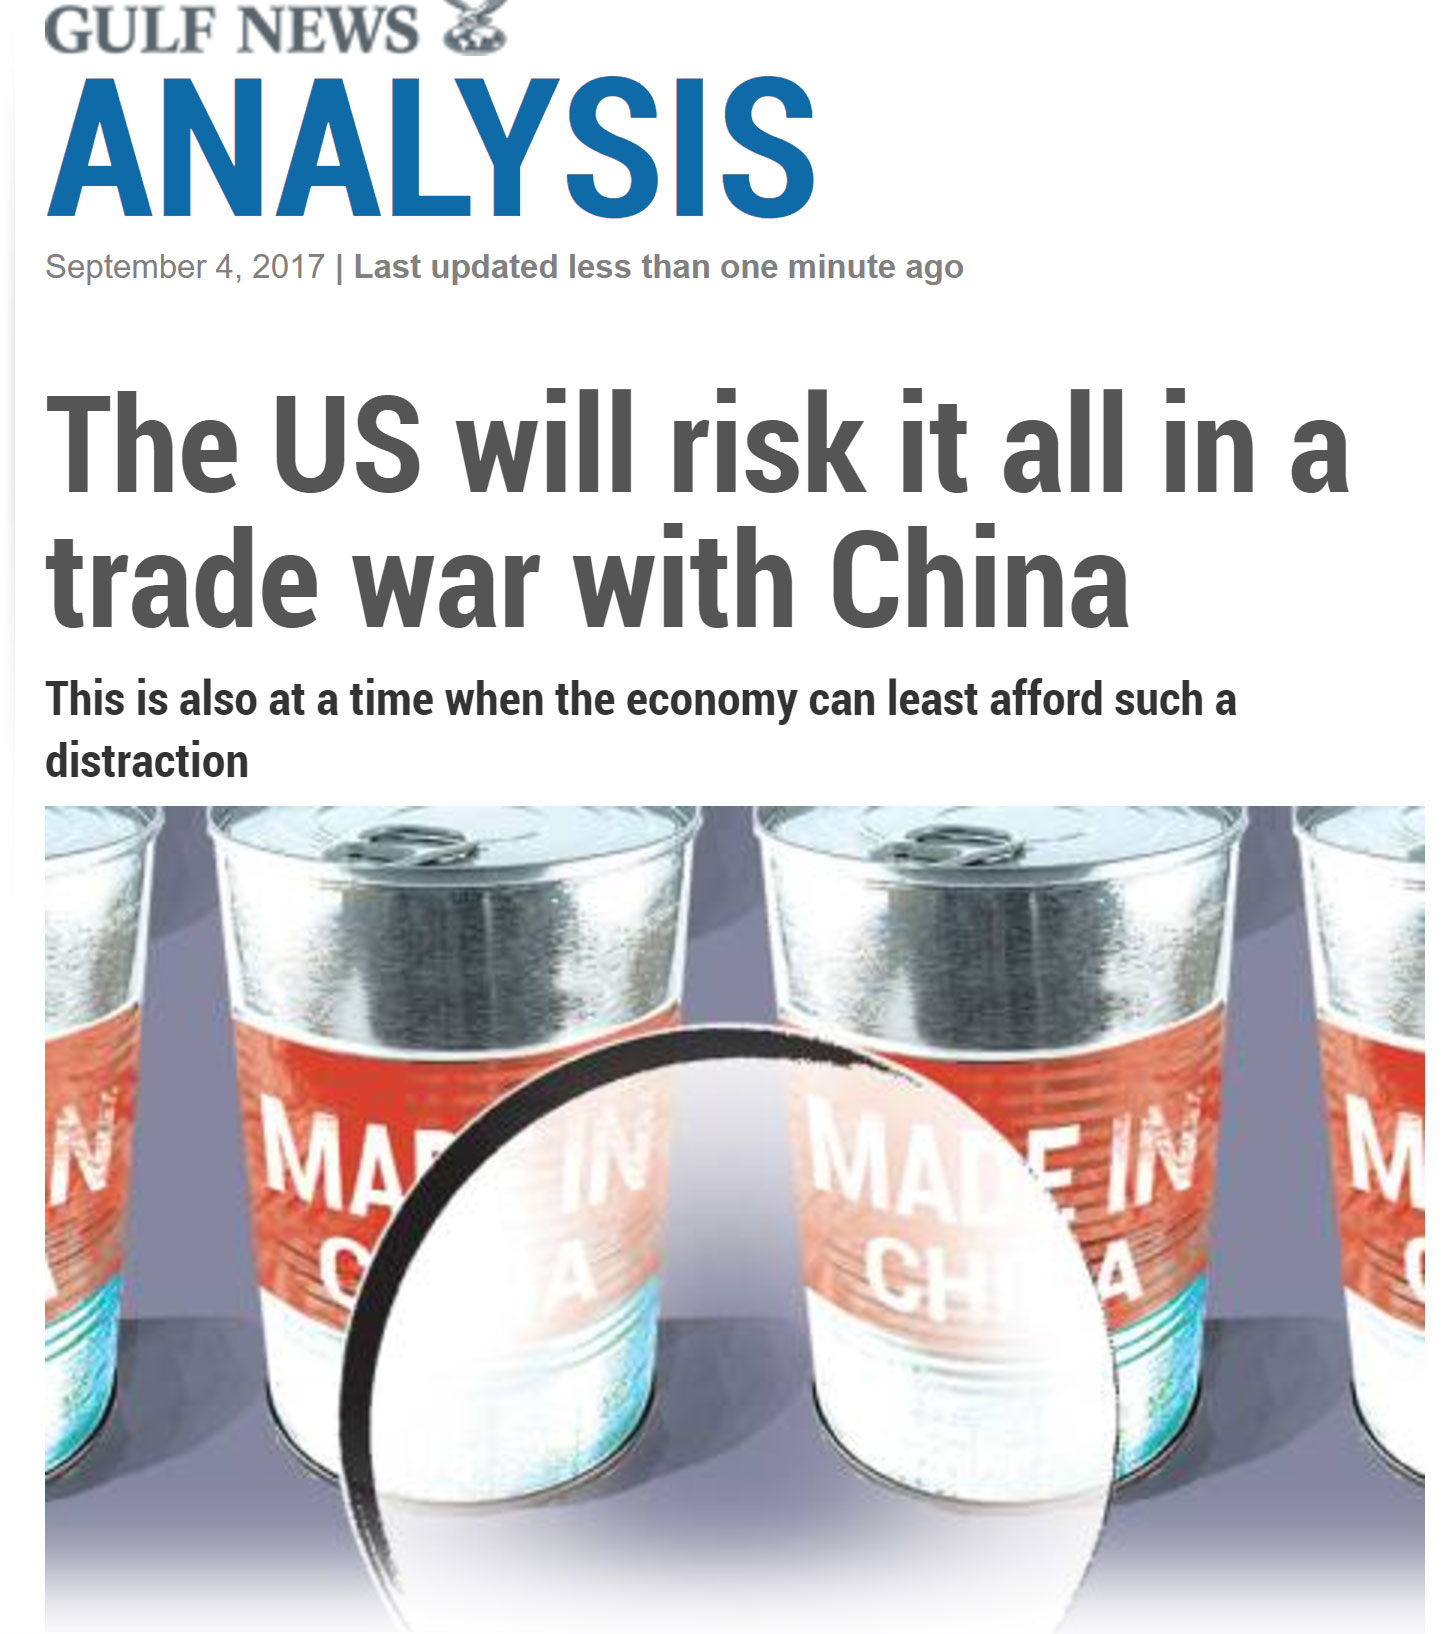 21-the-us-will-risk-it-all-in-a-trade-war-with-china.jpg